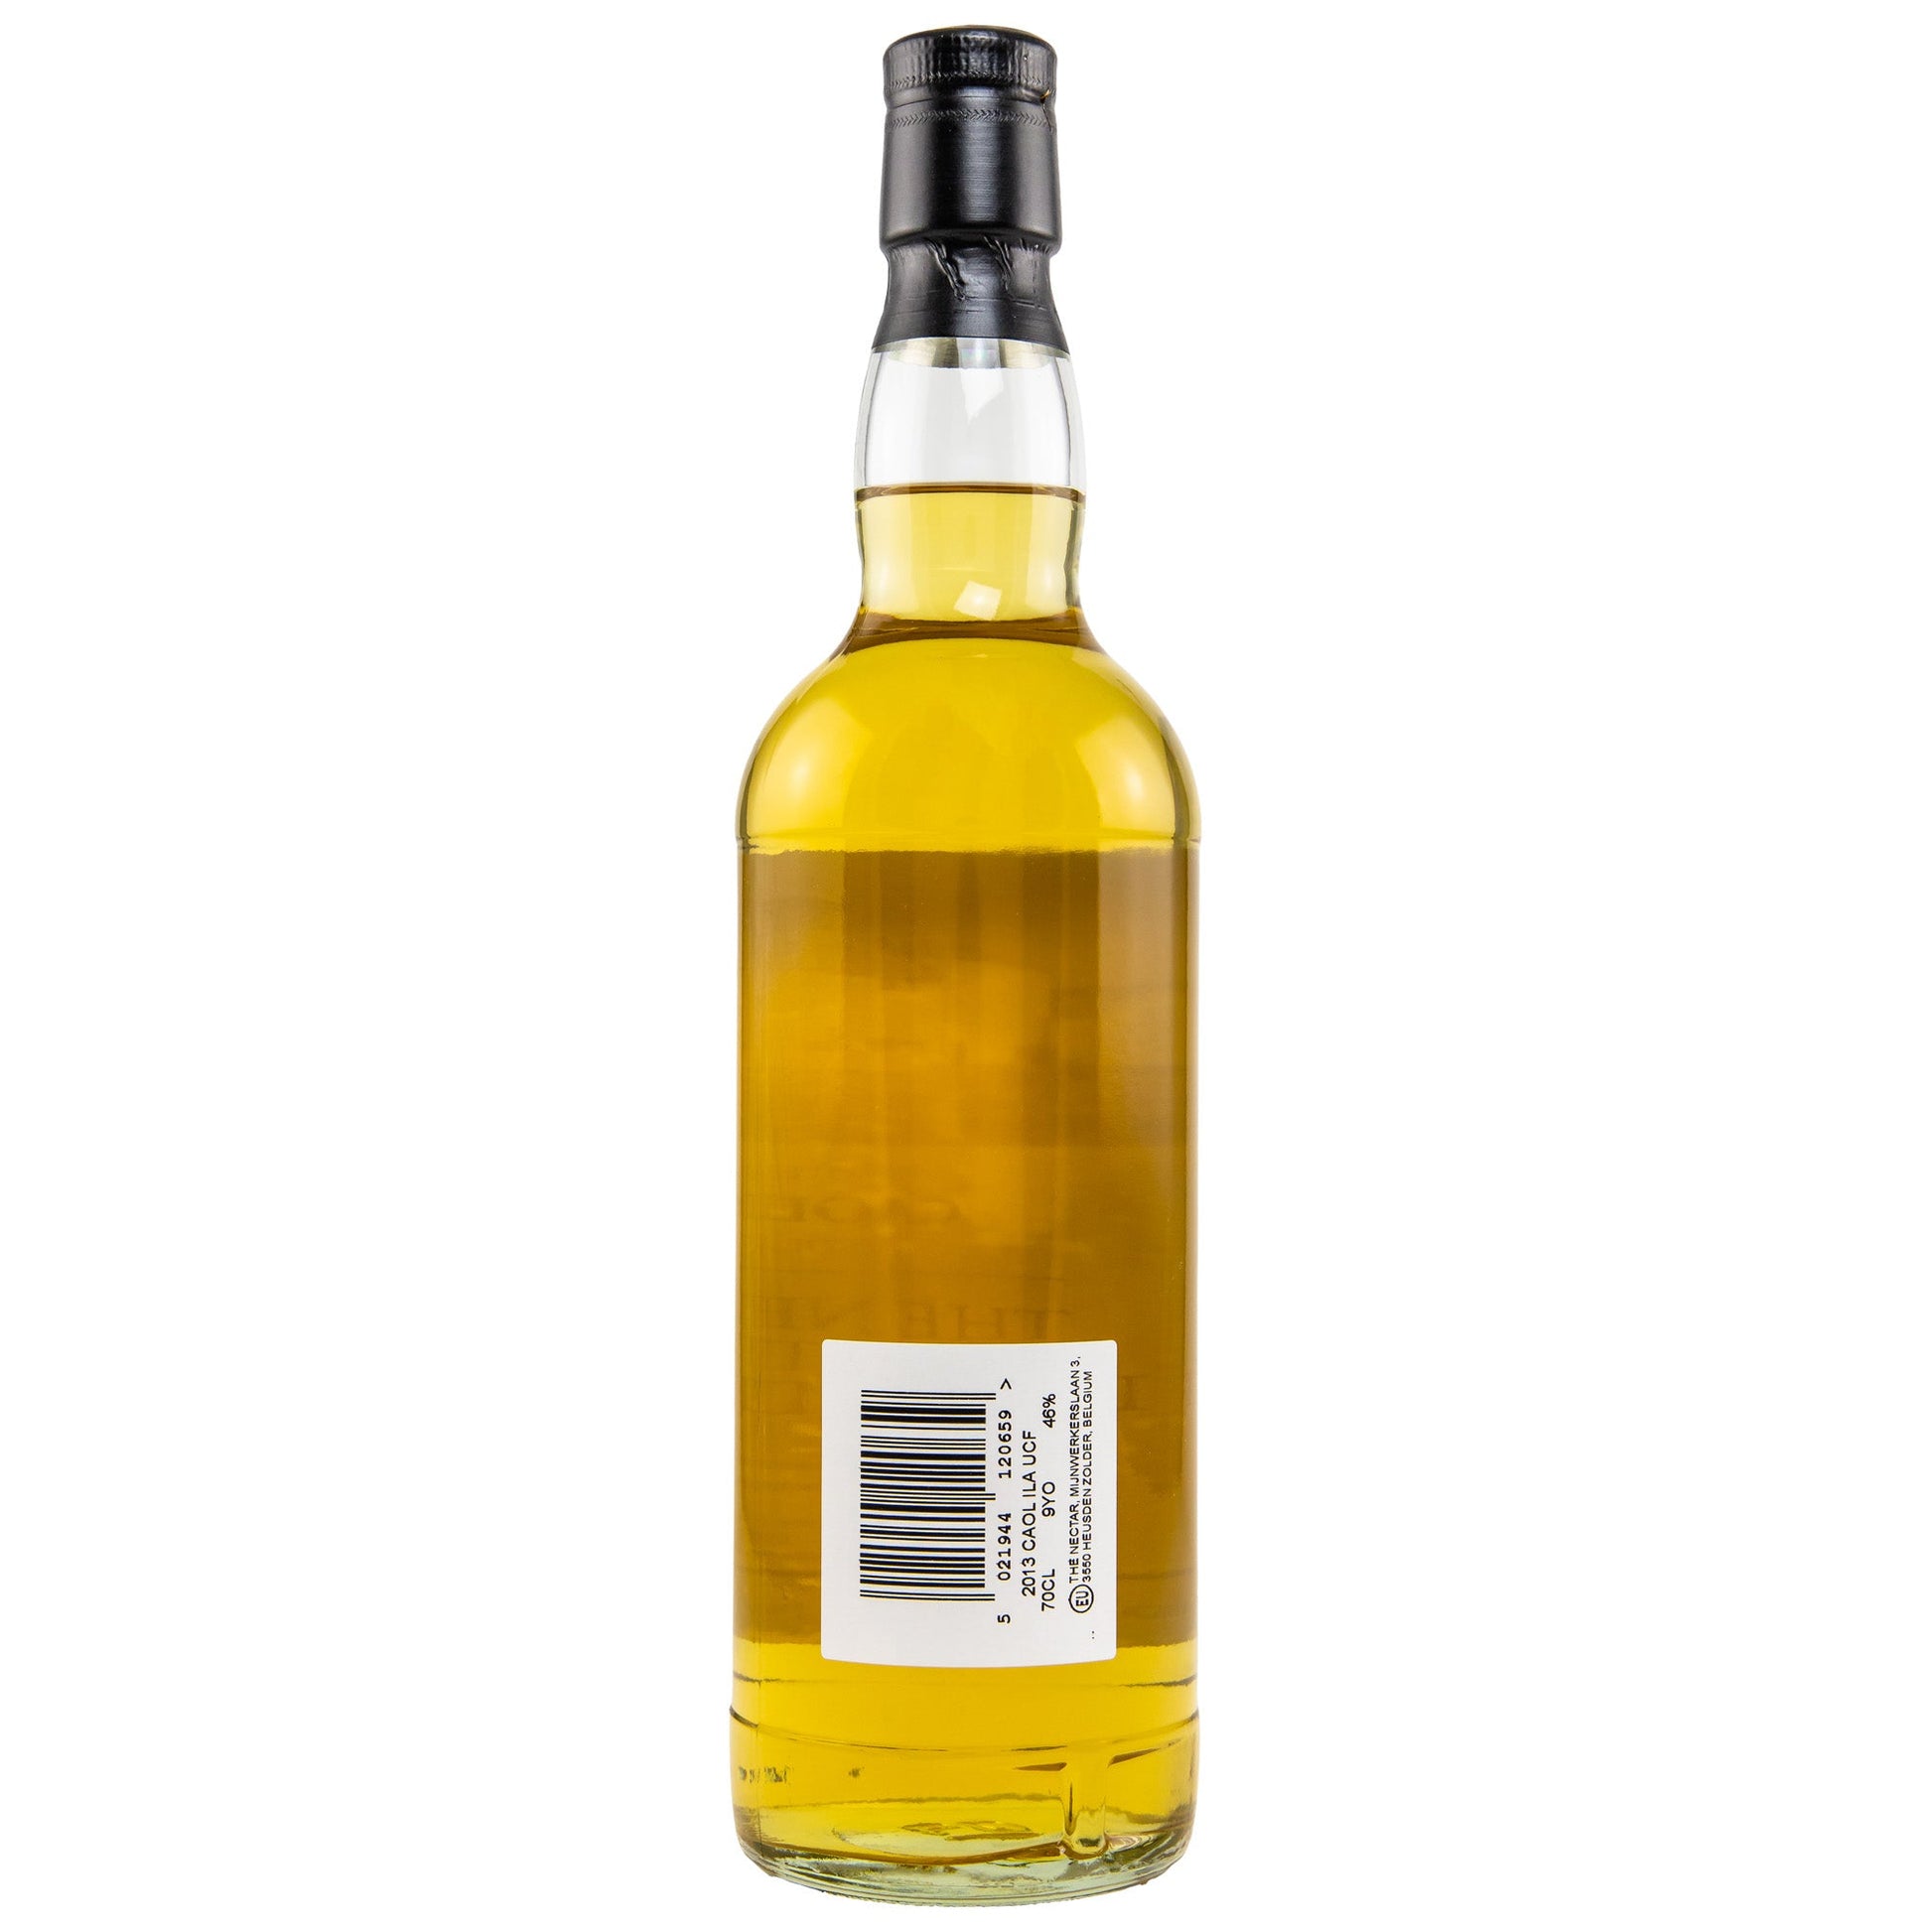 Caol Ila | 9 Jahre | 2013/2022 | The Nectar of the Daily Drams | 0,7l | 46%GET A BOTTLE